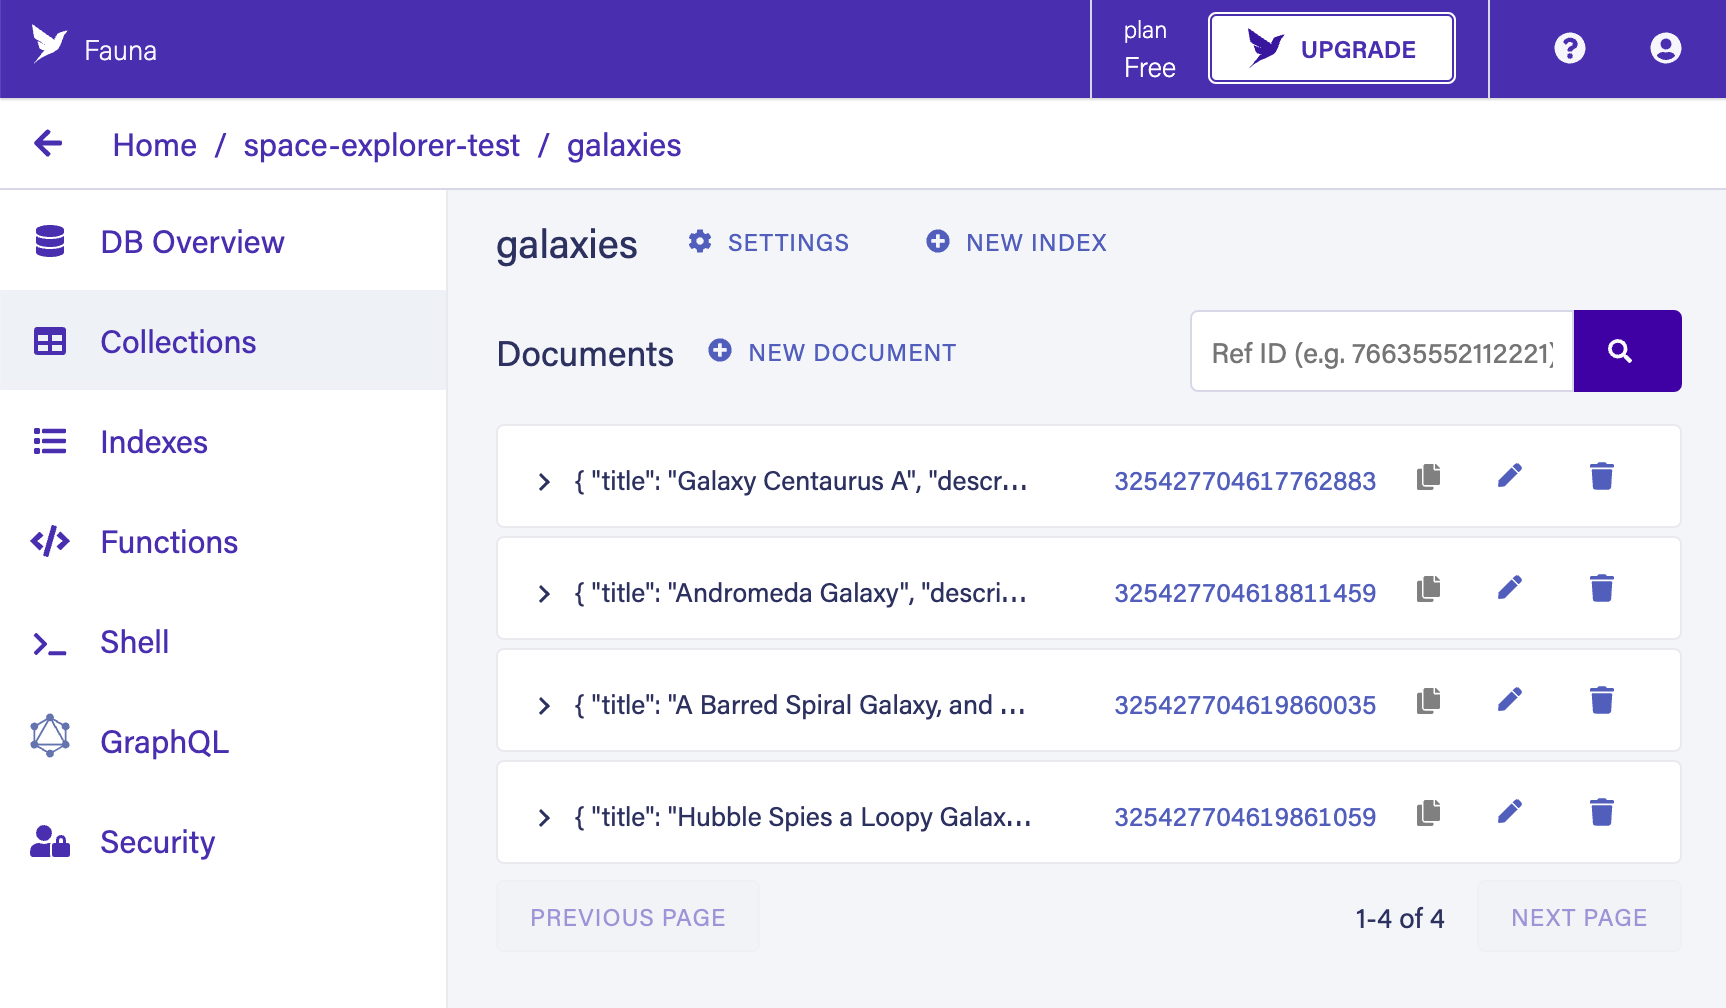 Fauna collections tab, with a list of galaxy JSON objects under the galaxies > documents heading.